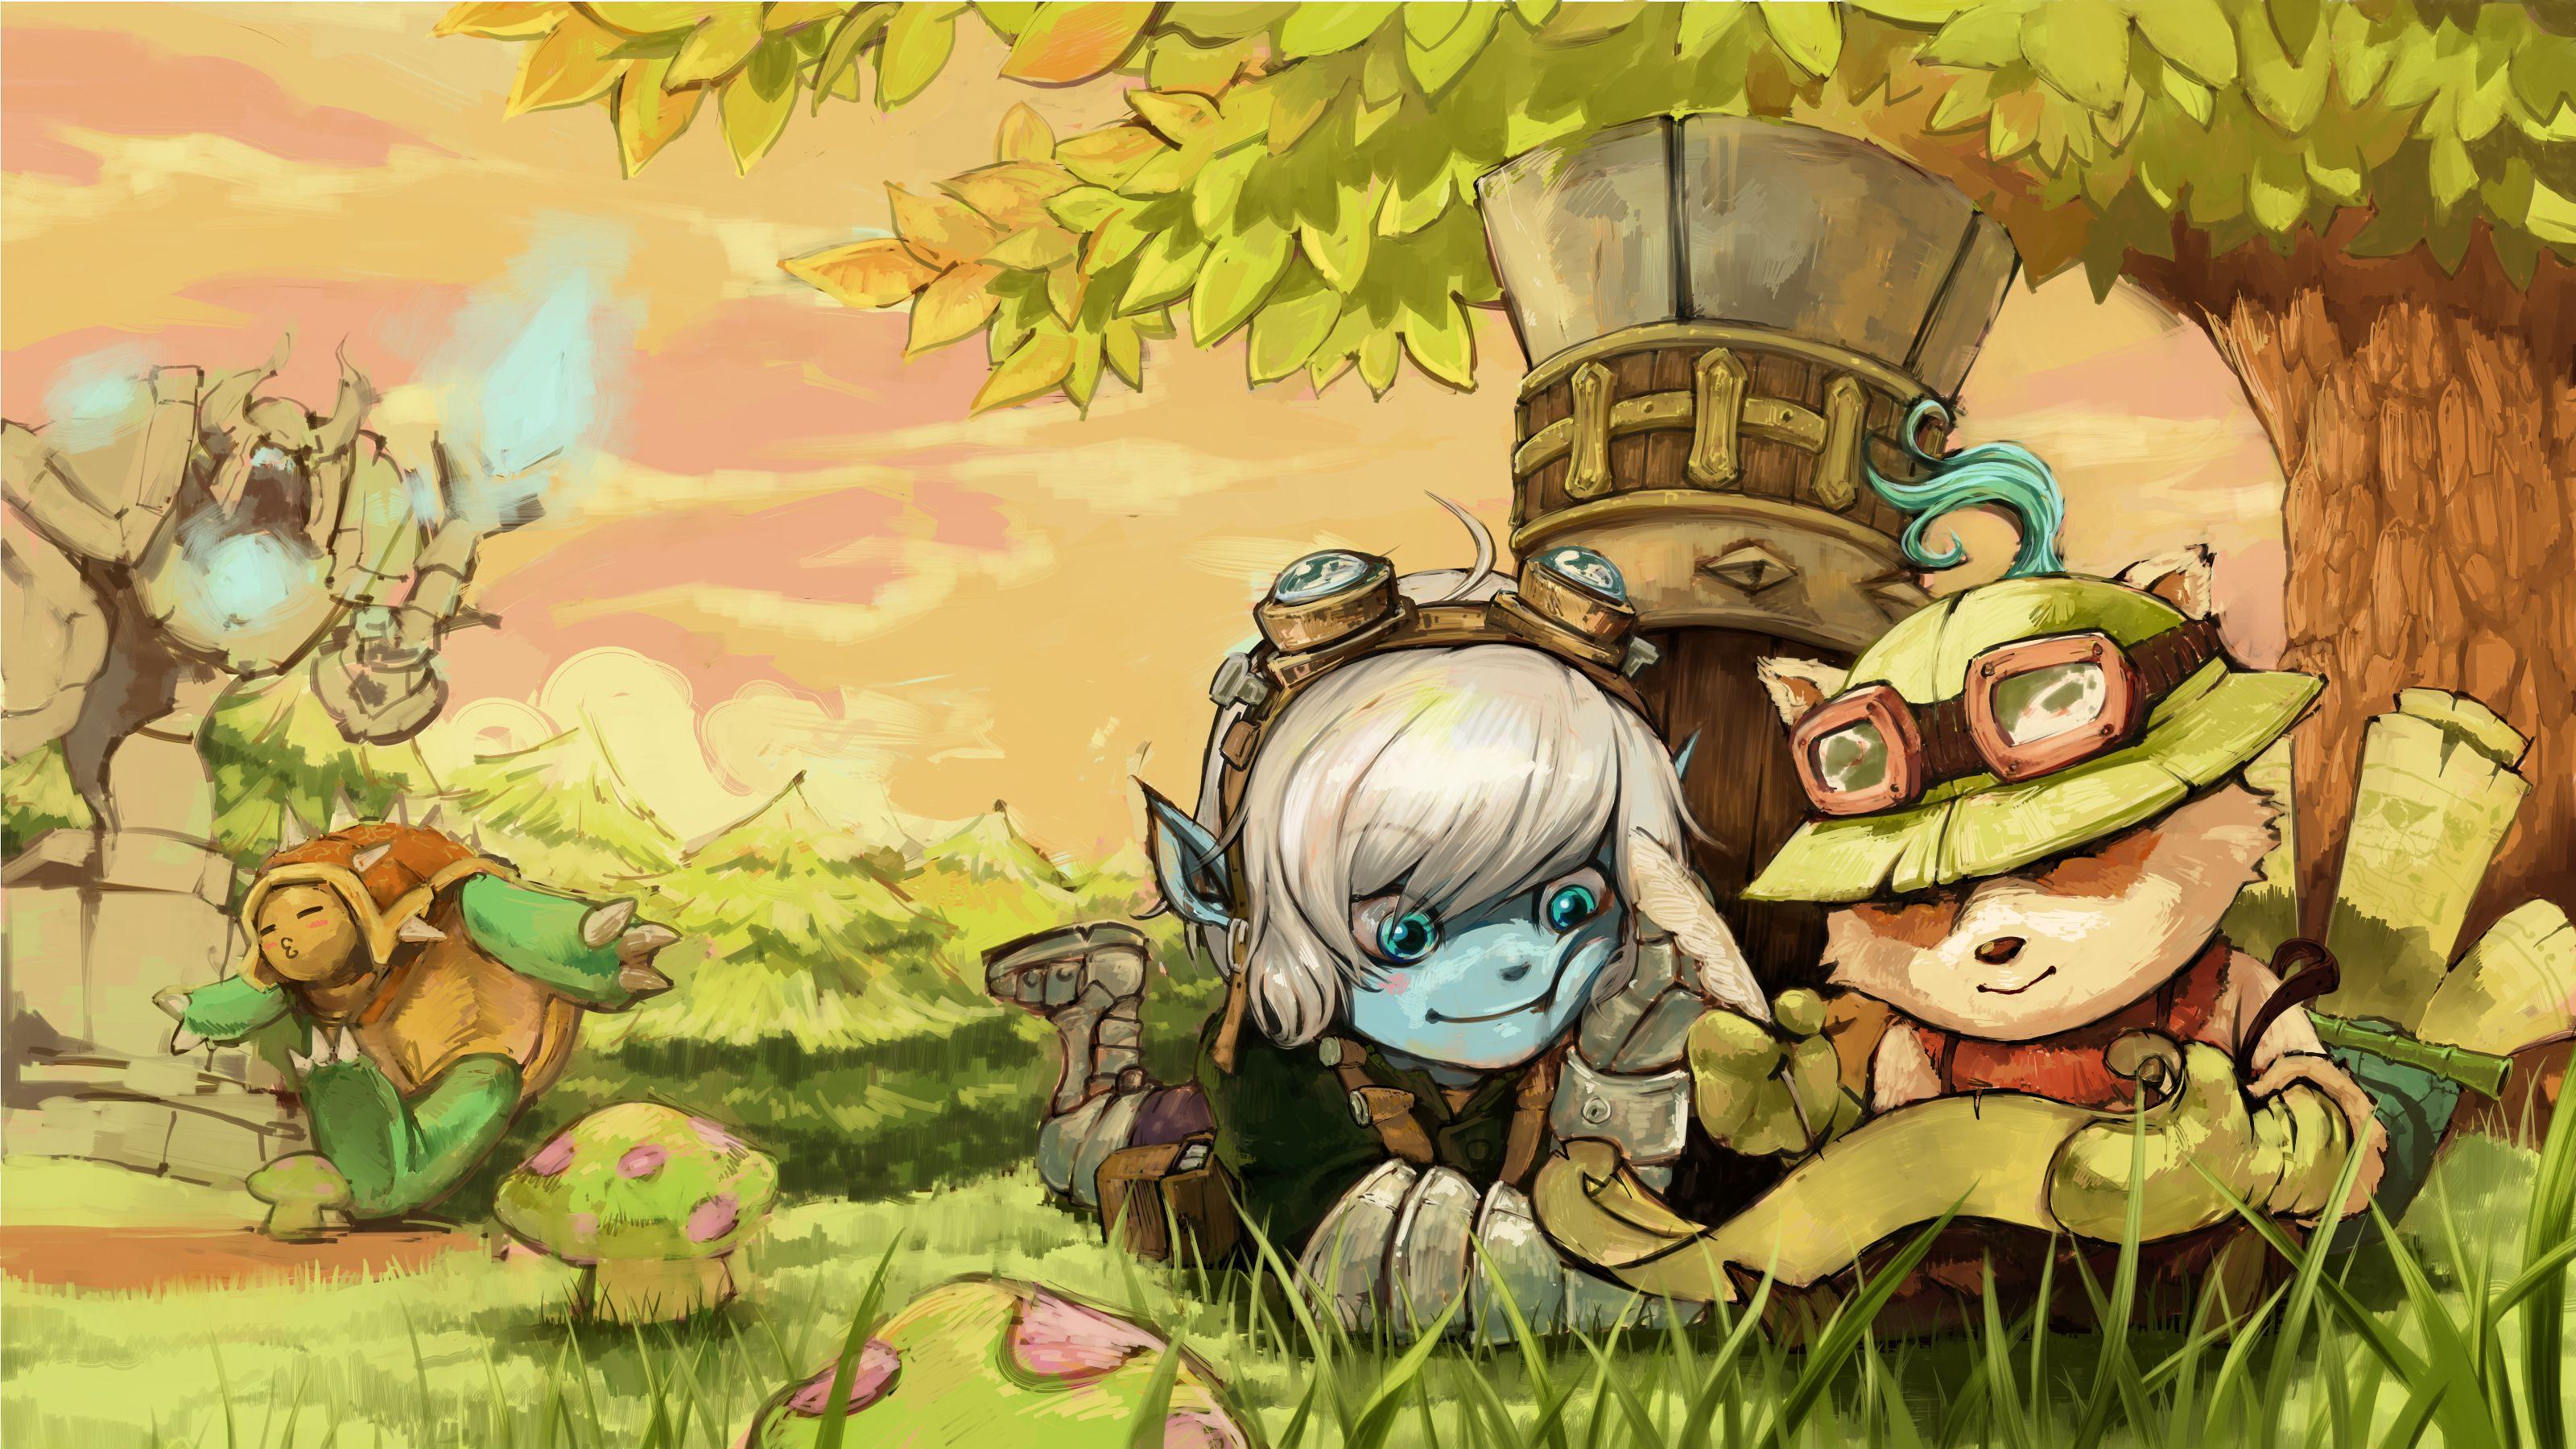 League of Legends Teemo and Trist Wallpaper